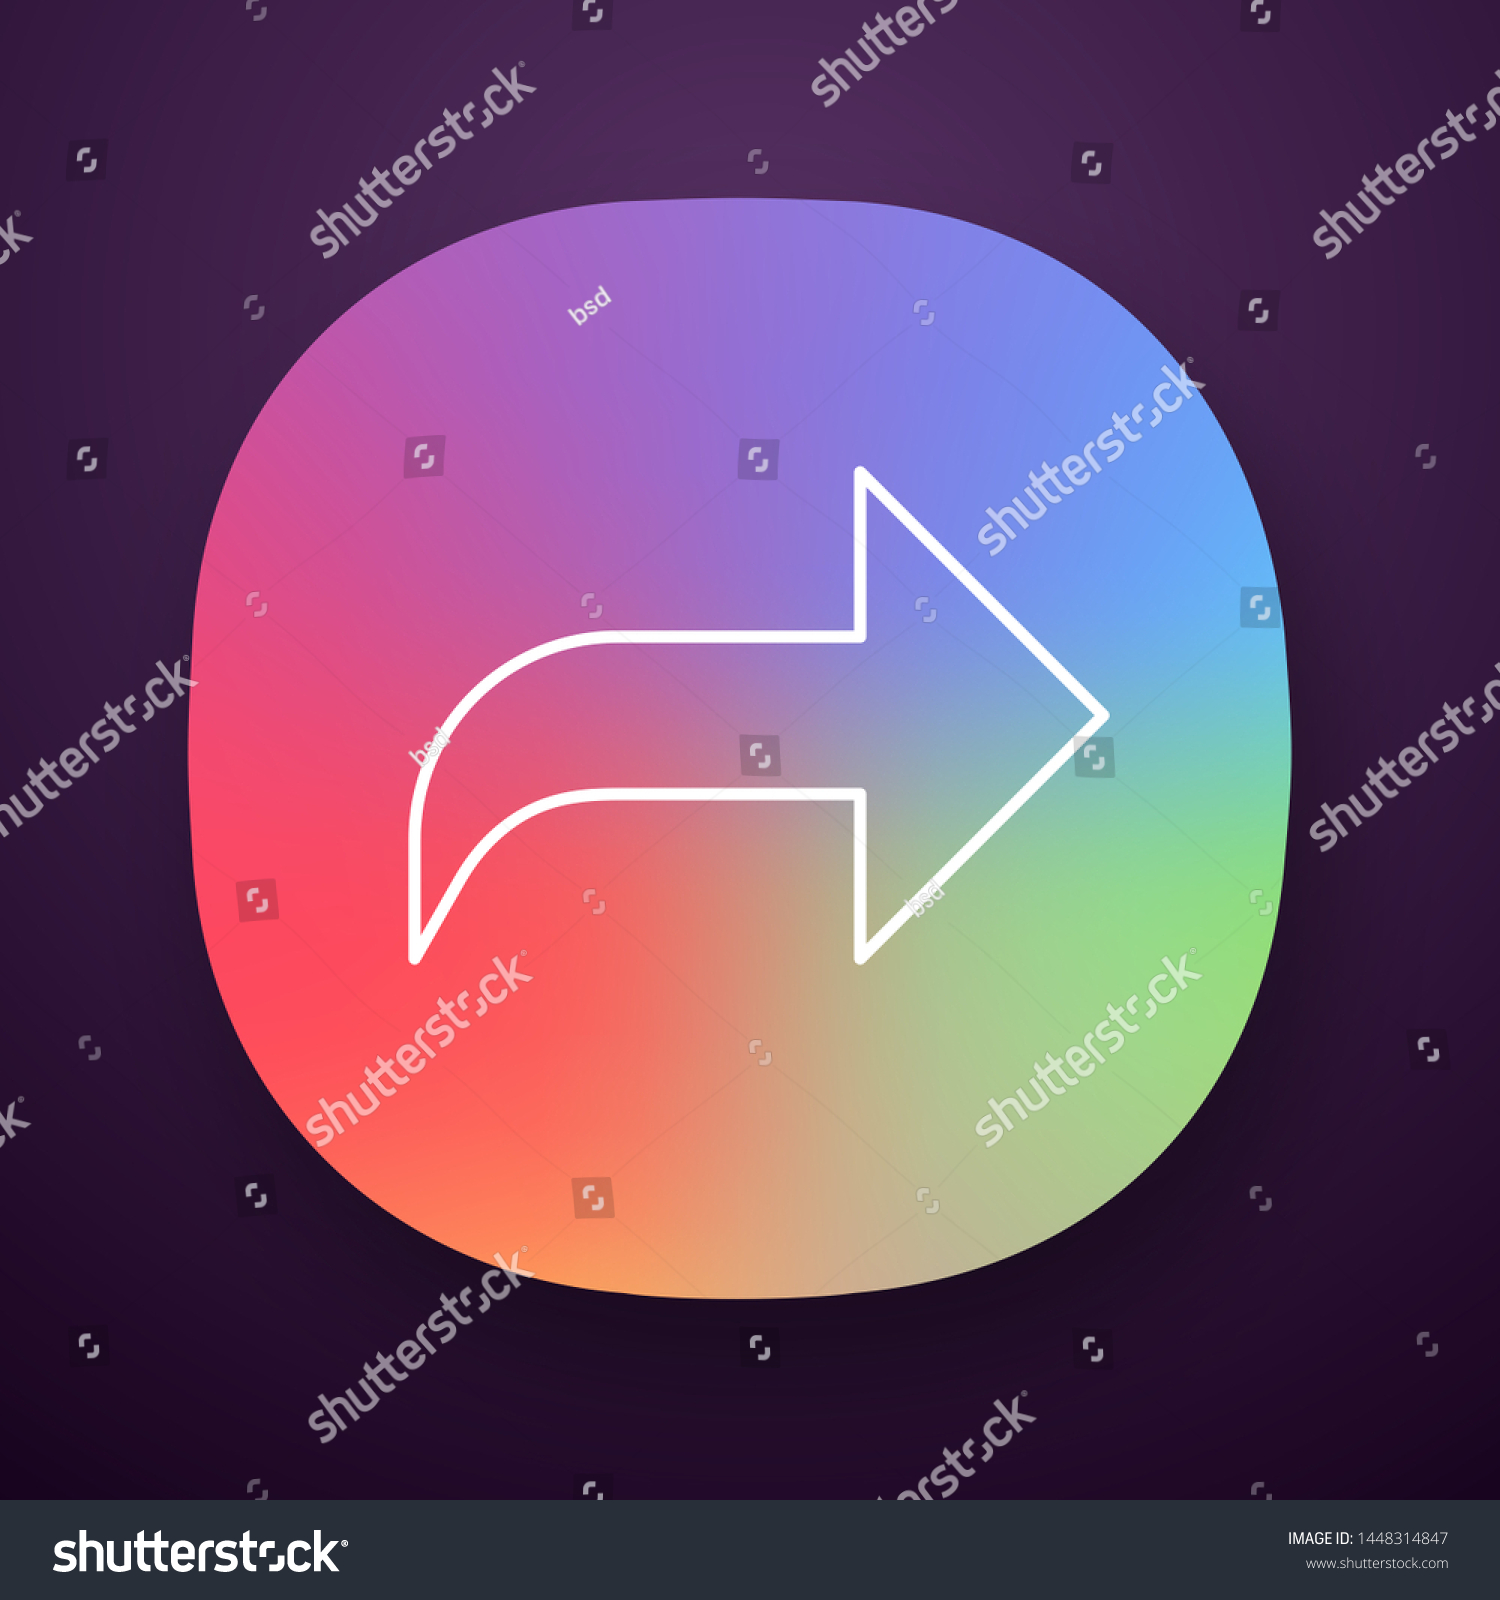 Right Curved Arrow App Icon Direction Stock Vector Royalty Free 1448314847 Shutterstock 8366